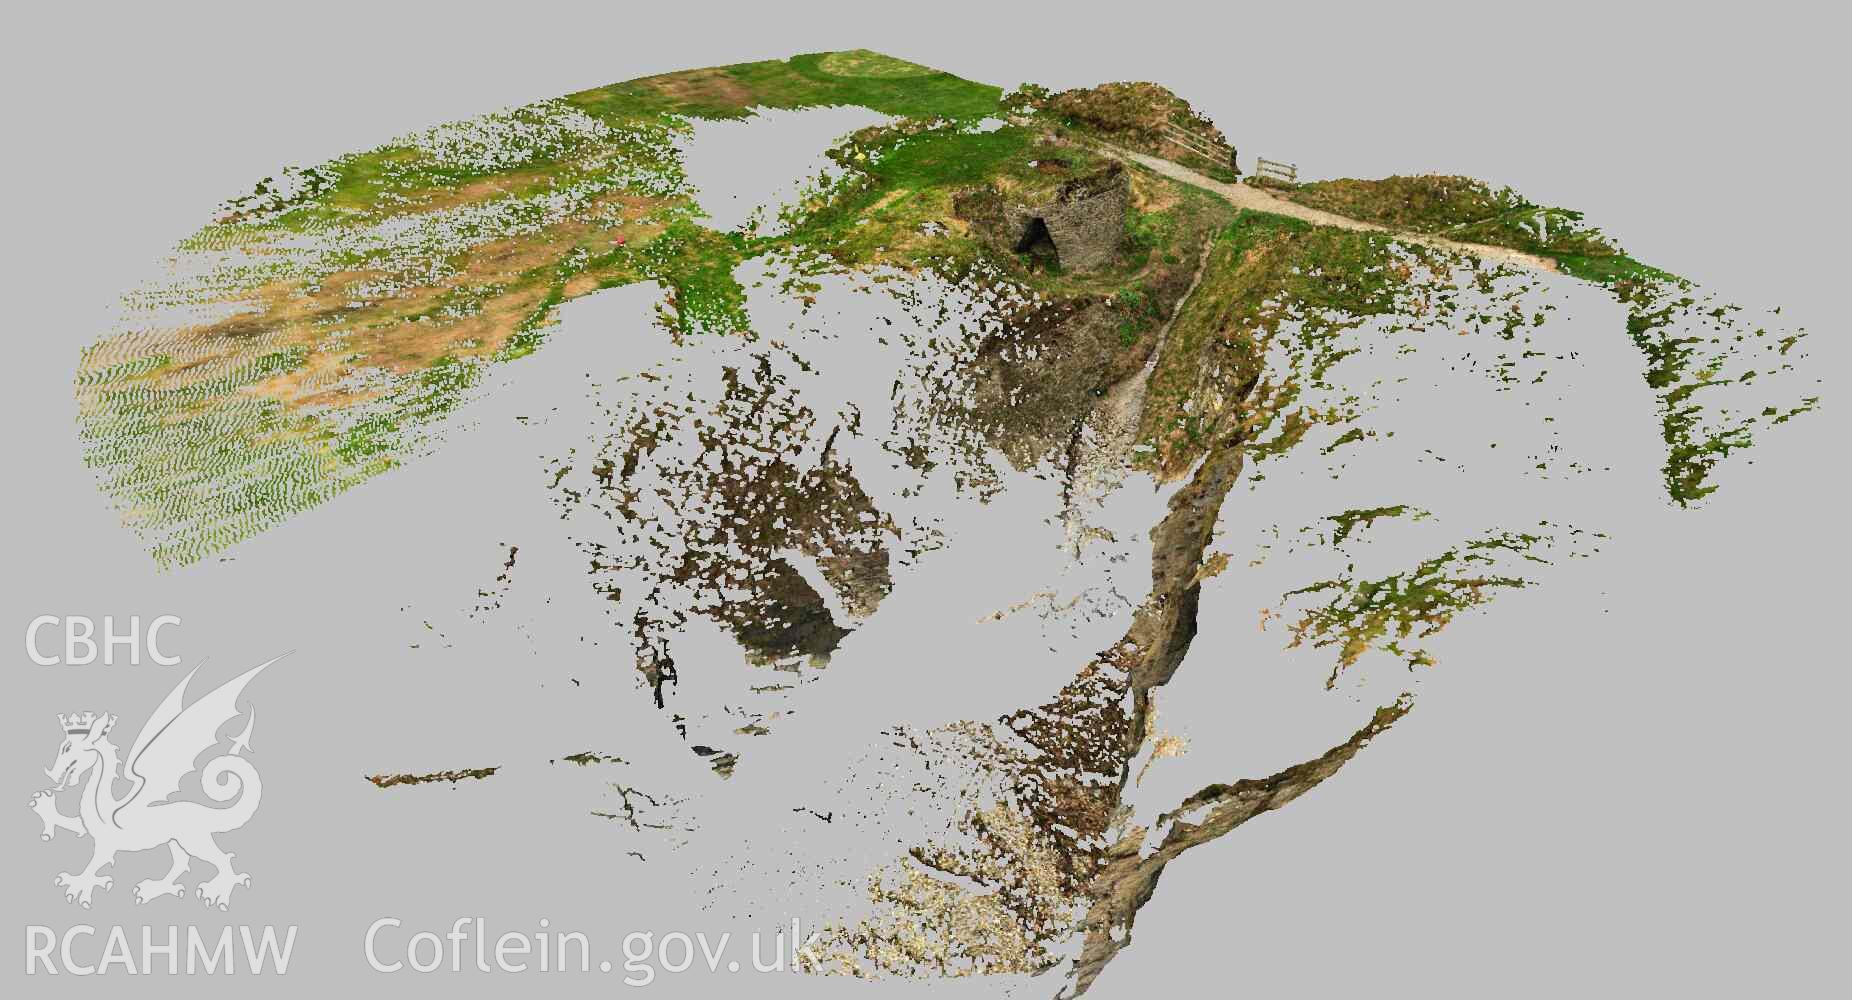 View of overall point cloud looking north. Part of a Terrestrial Laser Scanning Survey archive for Craig-y-Gwbert limekiln, carried out by Dr Jayne Kamintzis of RCAHMW on 20 September 2022.